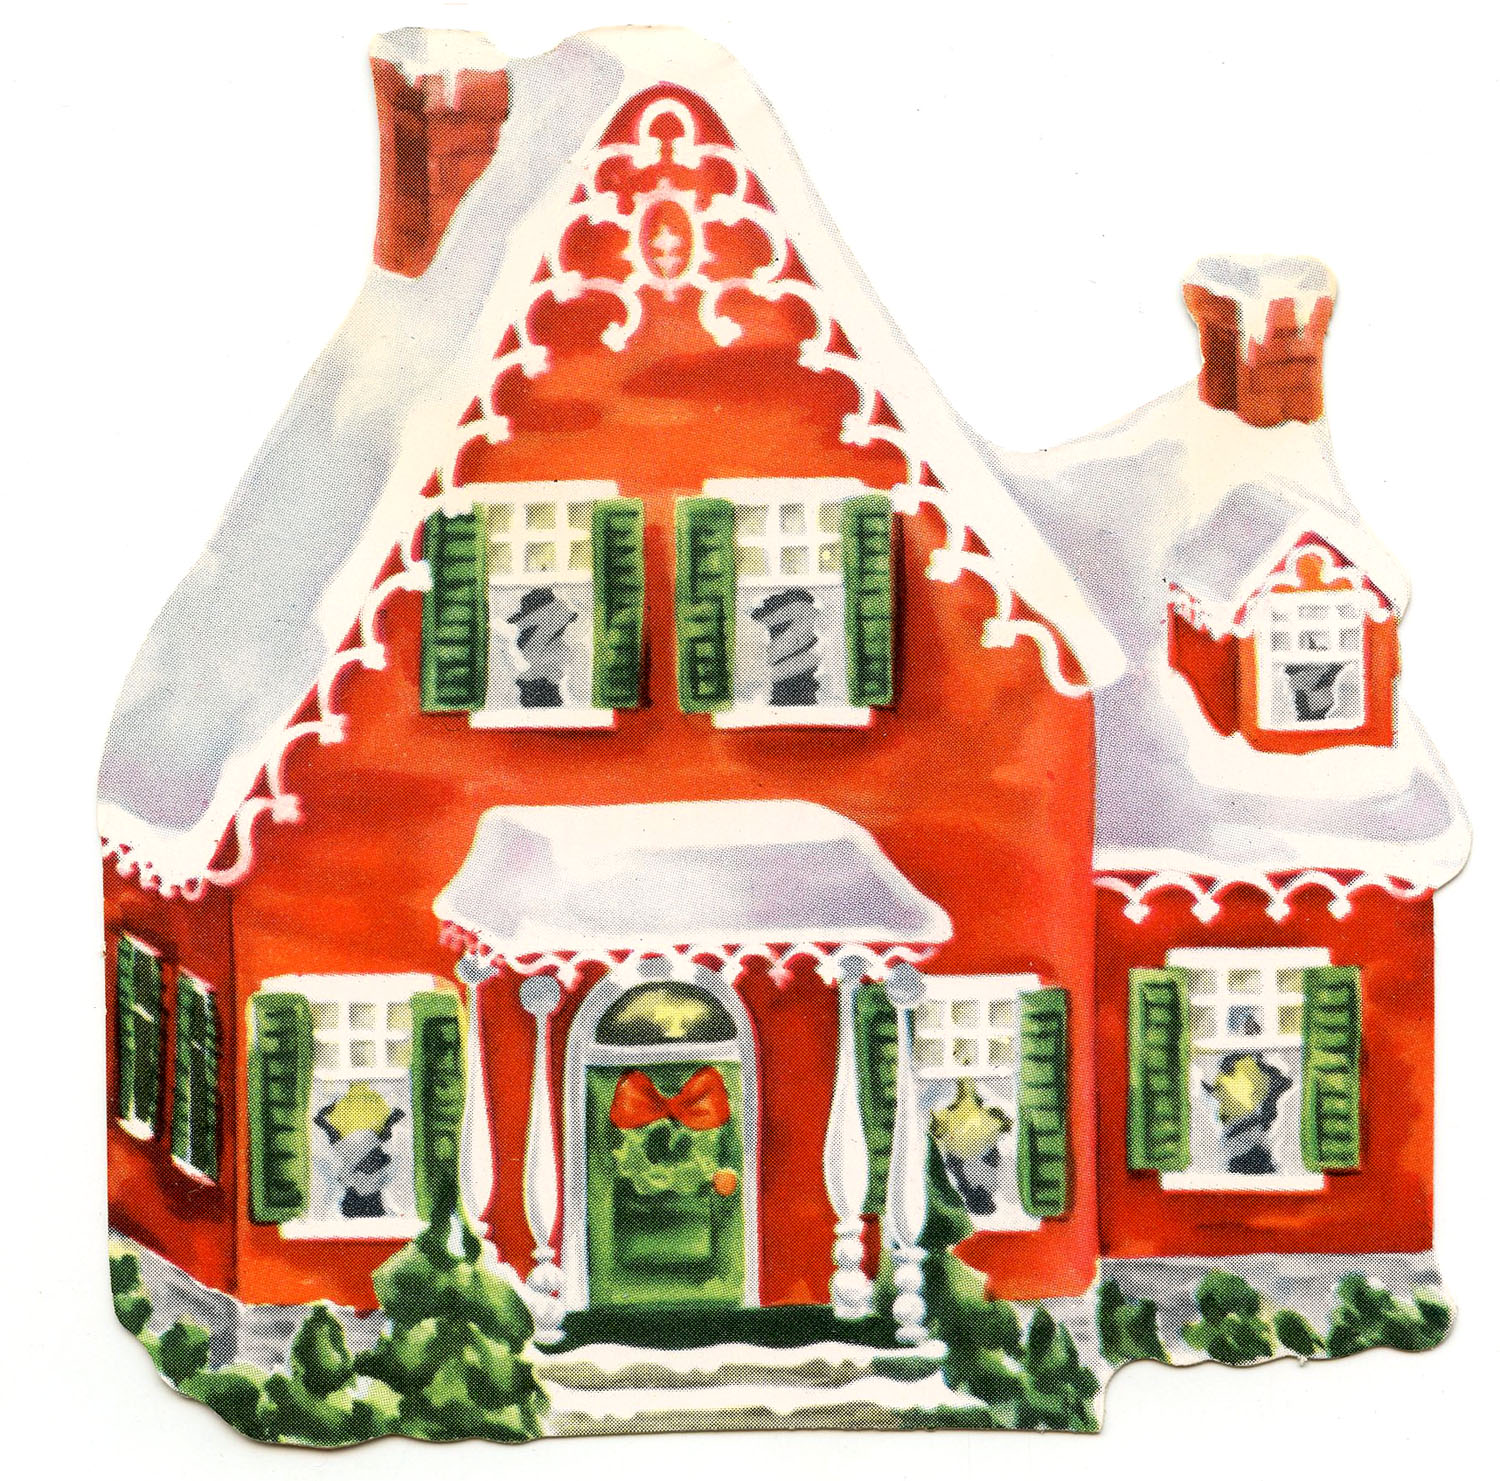 Retro Clip Art   Darling Christmas Cottage   The Graphics Fairy